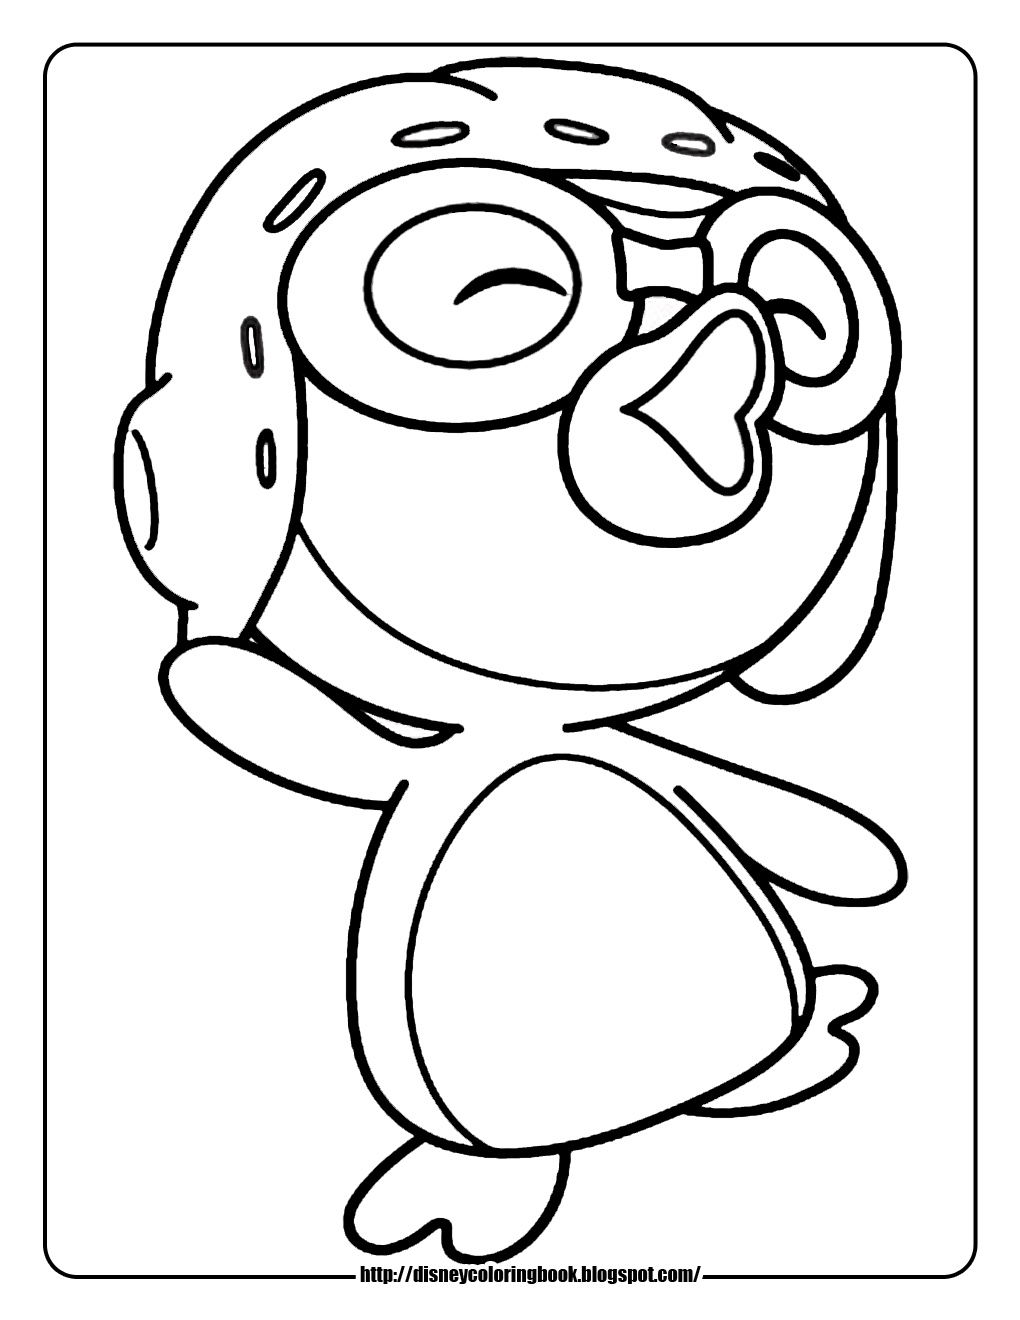 Pororo the little penguin coloring pages JPG